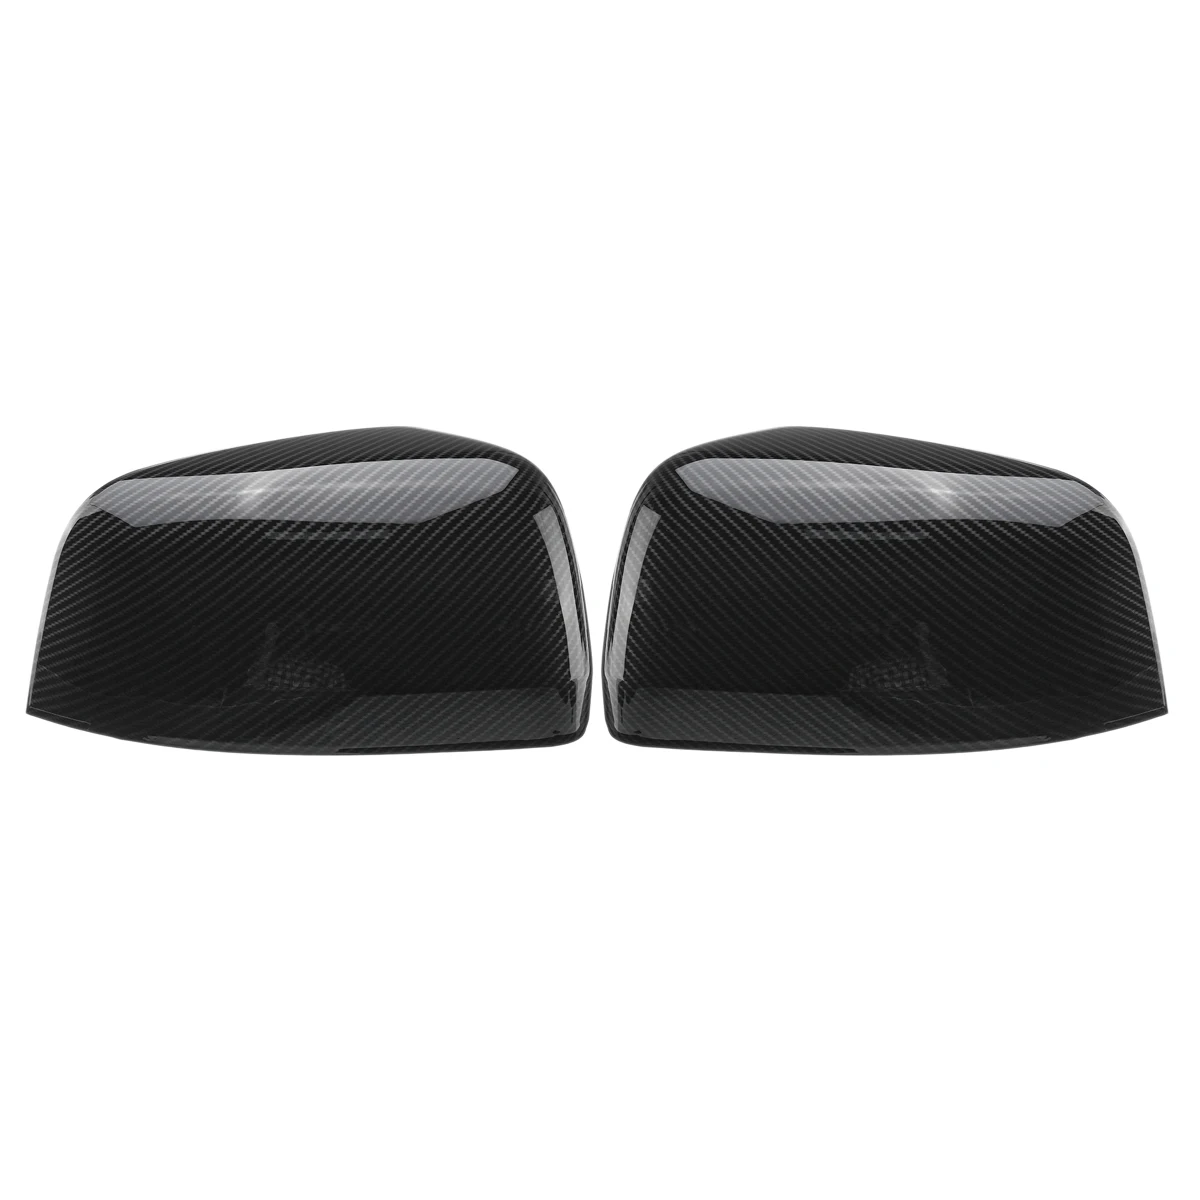 

For Jeep Grand Cherokee 2011 2012 2013 2014 15 16 2017 1 Pair Abs Car Carbon Black Style Rearview Side Wing Mirror Cover Trim